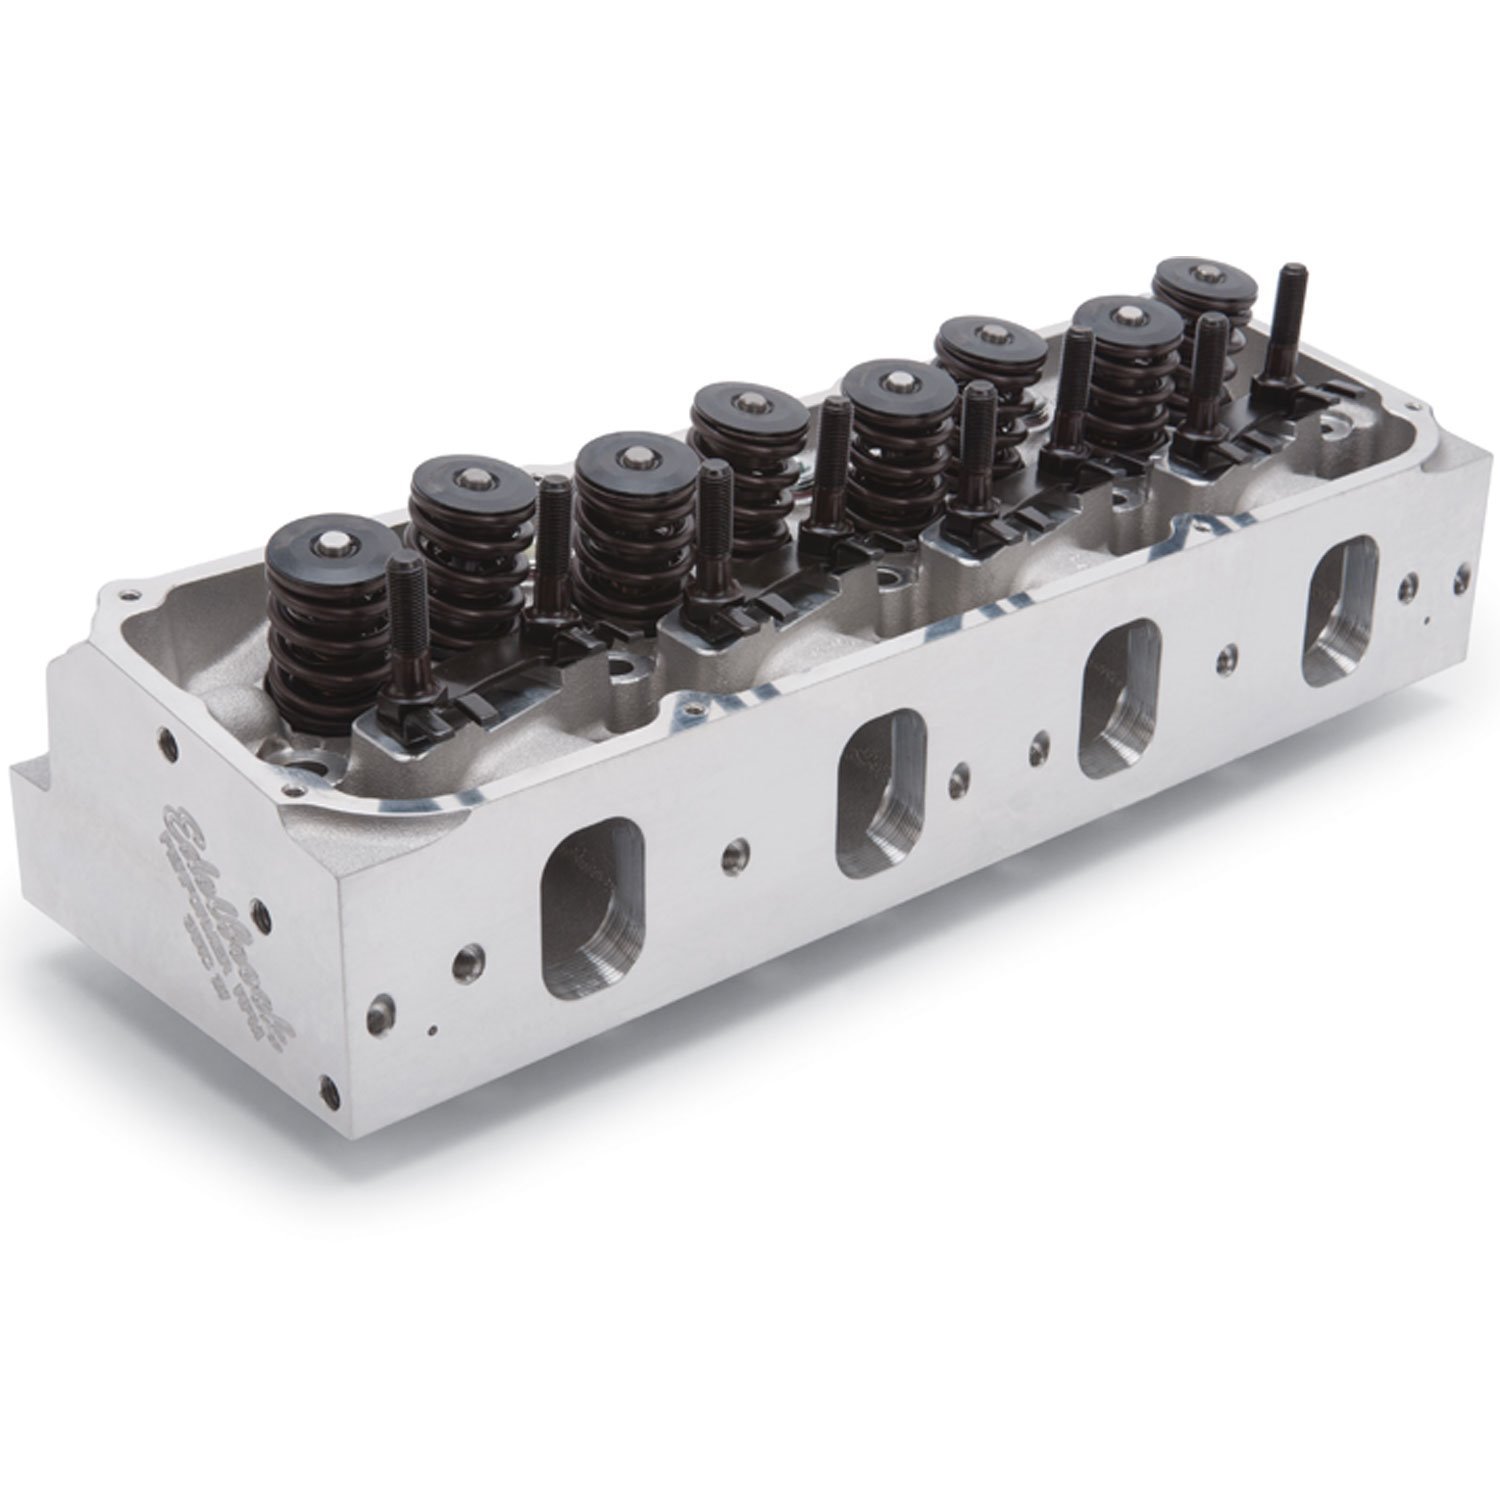 61629 Performer RPM Cleveland Cylinder Heads for Small Block Ford 351C, 351M, 400M